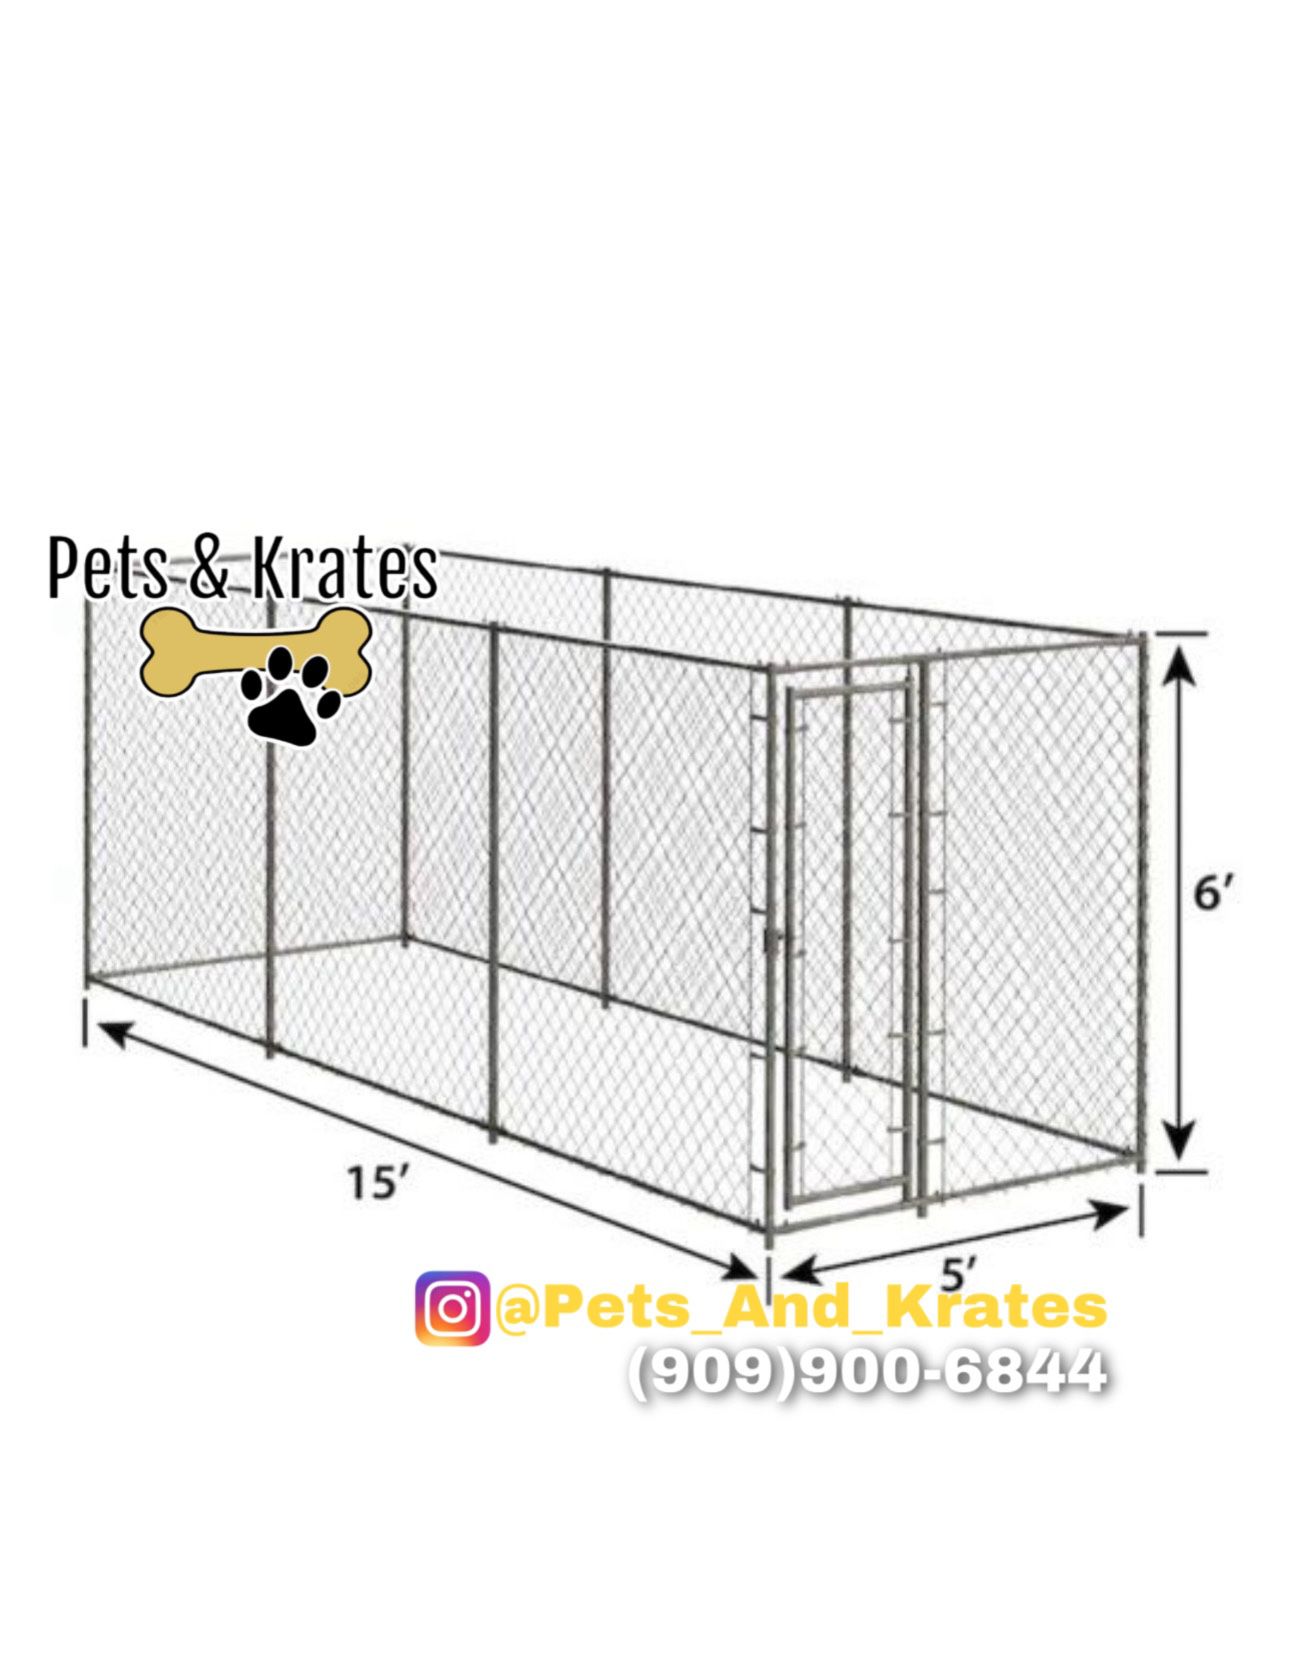 NEW! 15ft x 5ft x 6ft Chain Link Boxed Dog Kennel